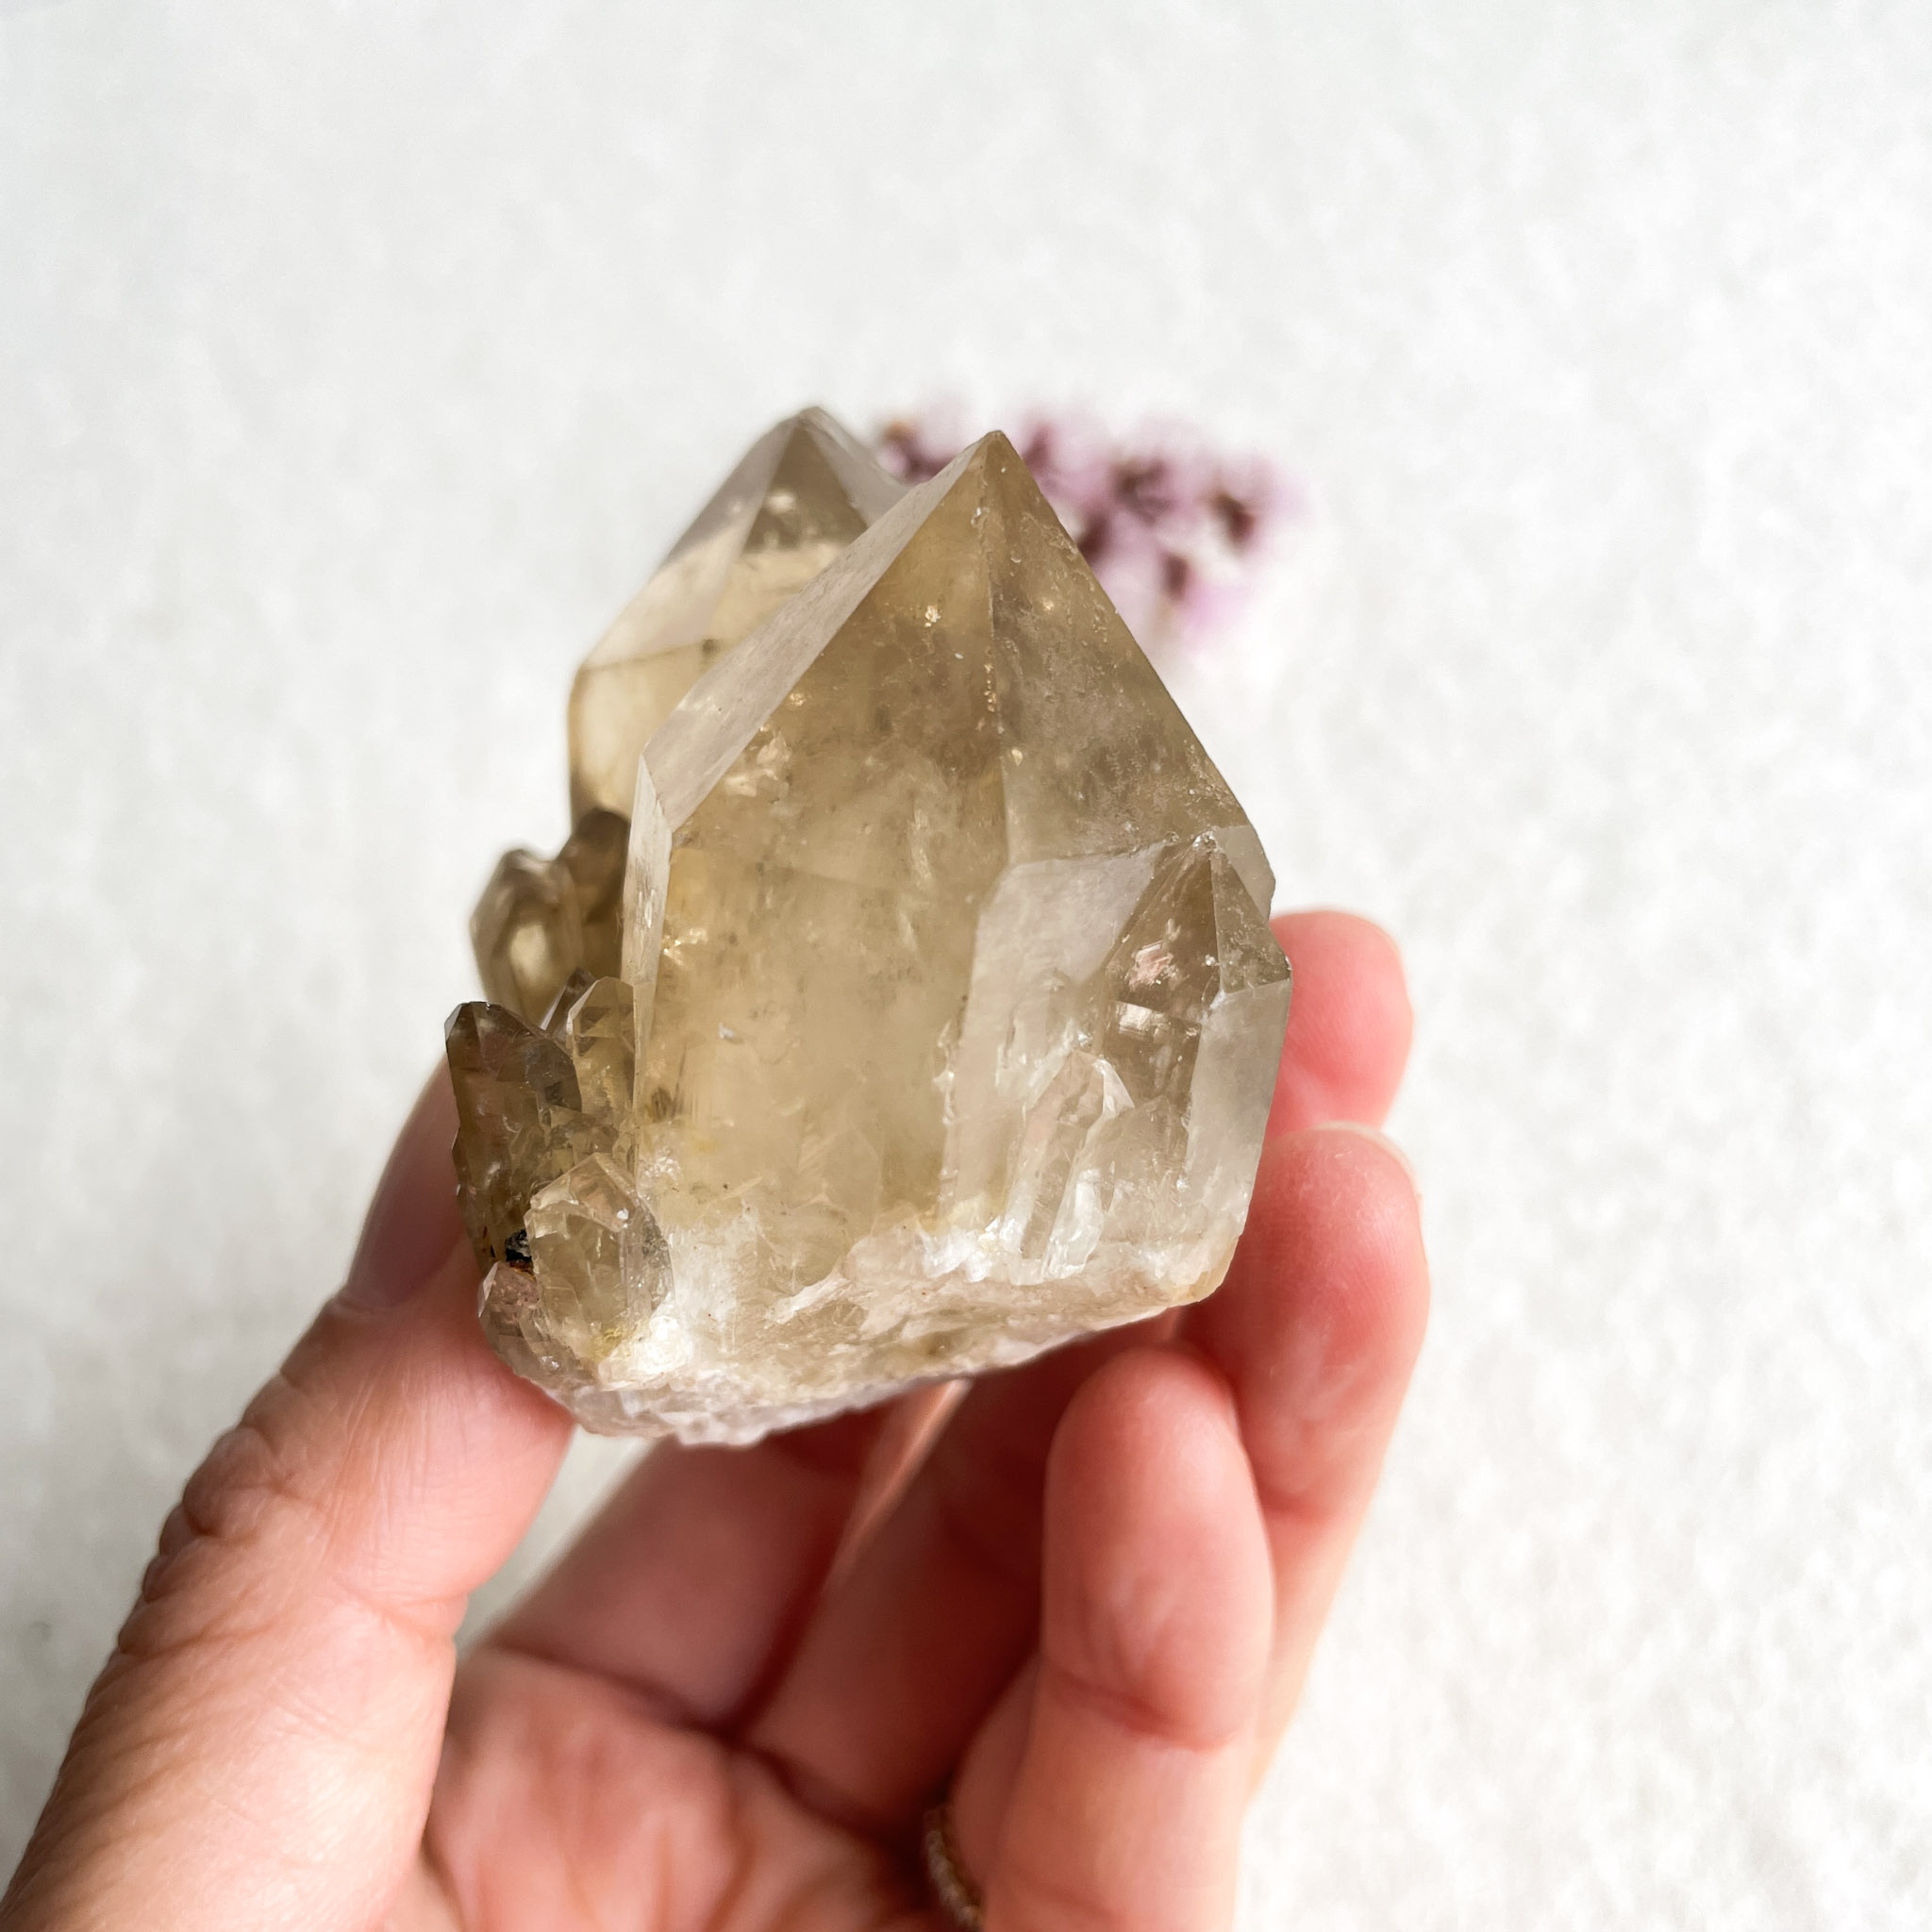 A person's hand holding a large, translucent crystal with multiple facets against a white background with a soft blurred element in the corner.